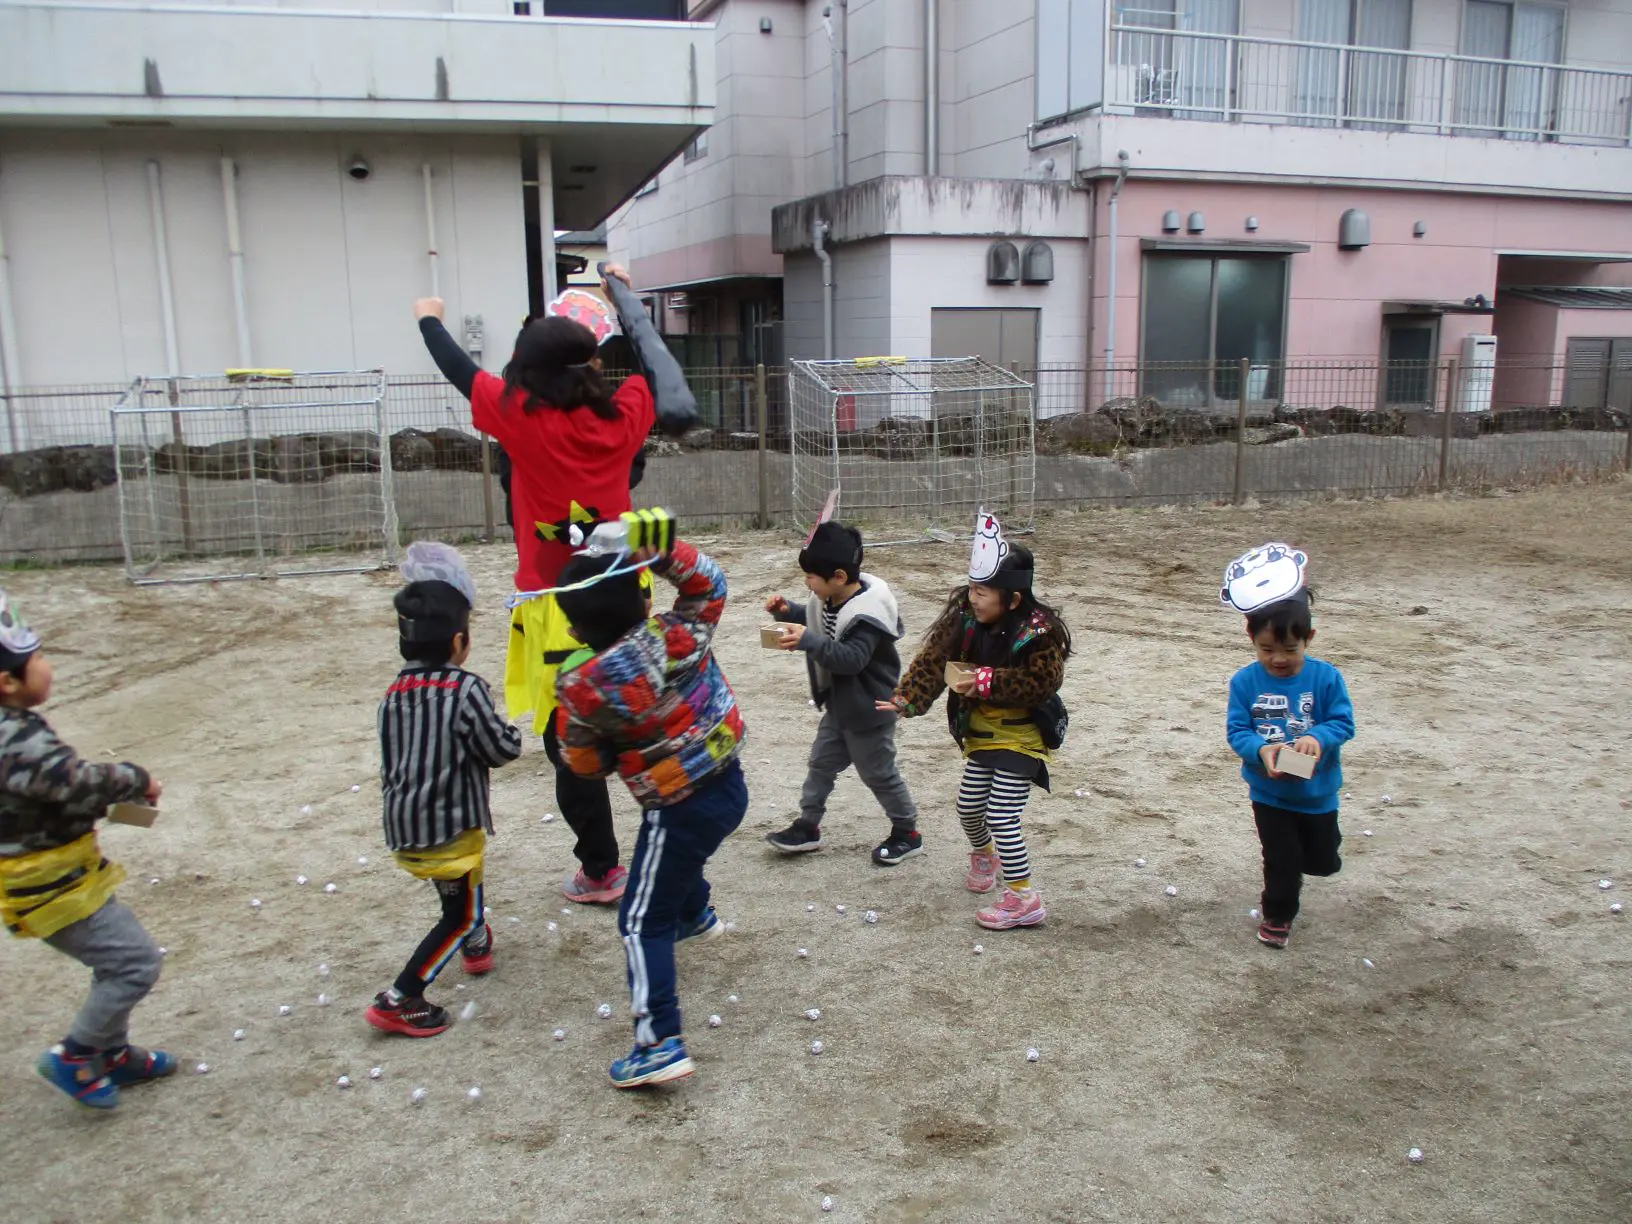 children at Tanpopo playing with a childminder